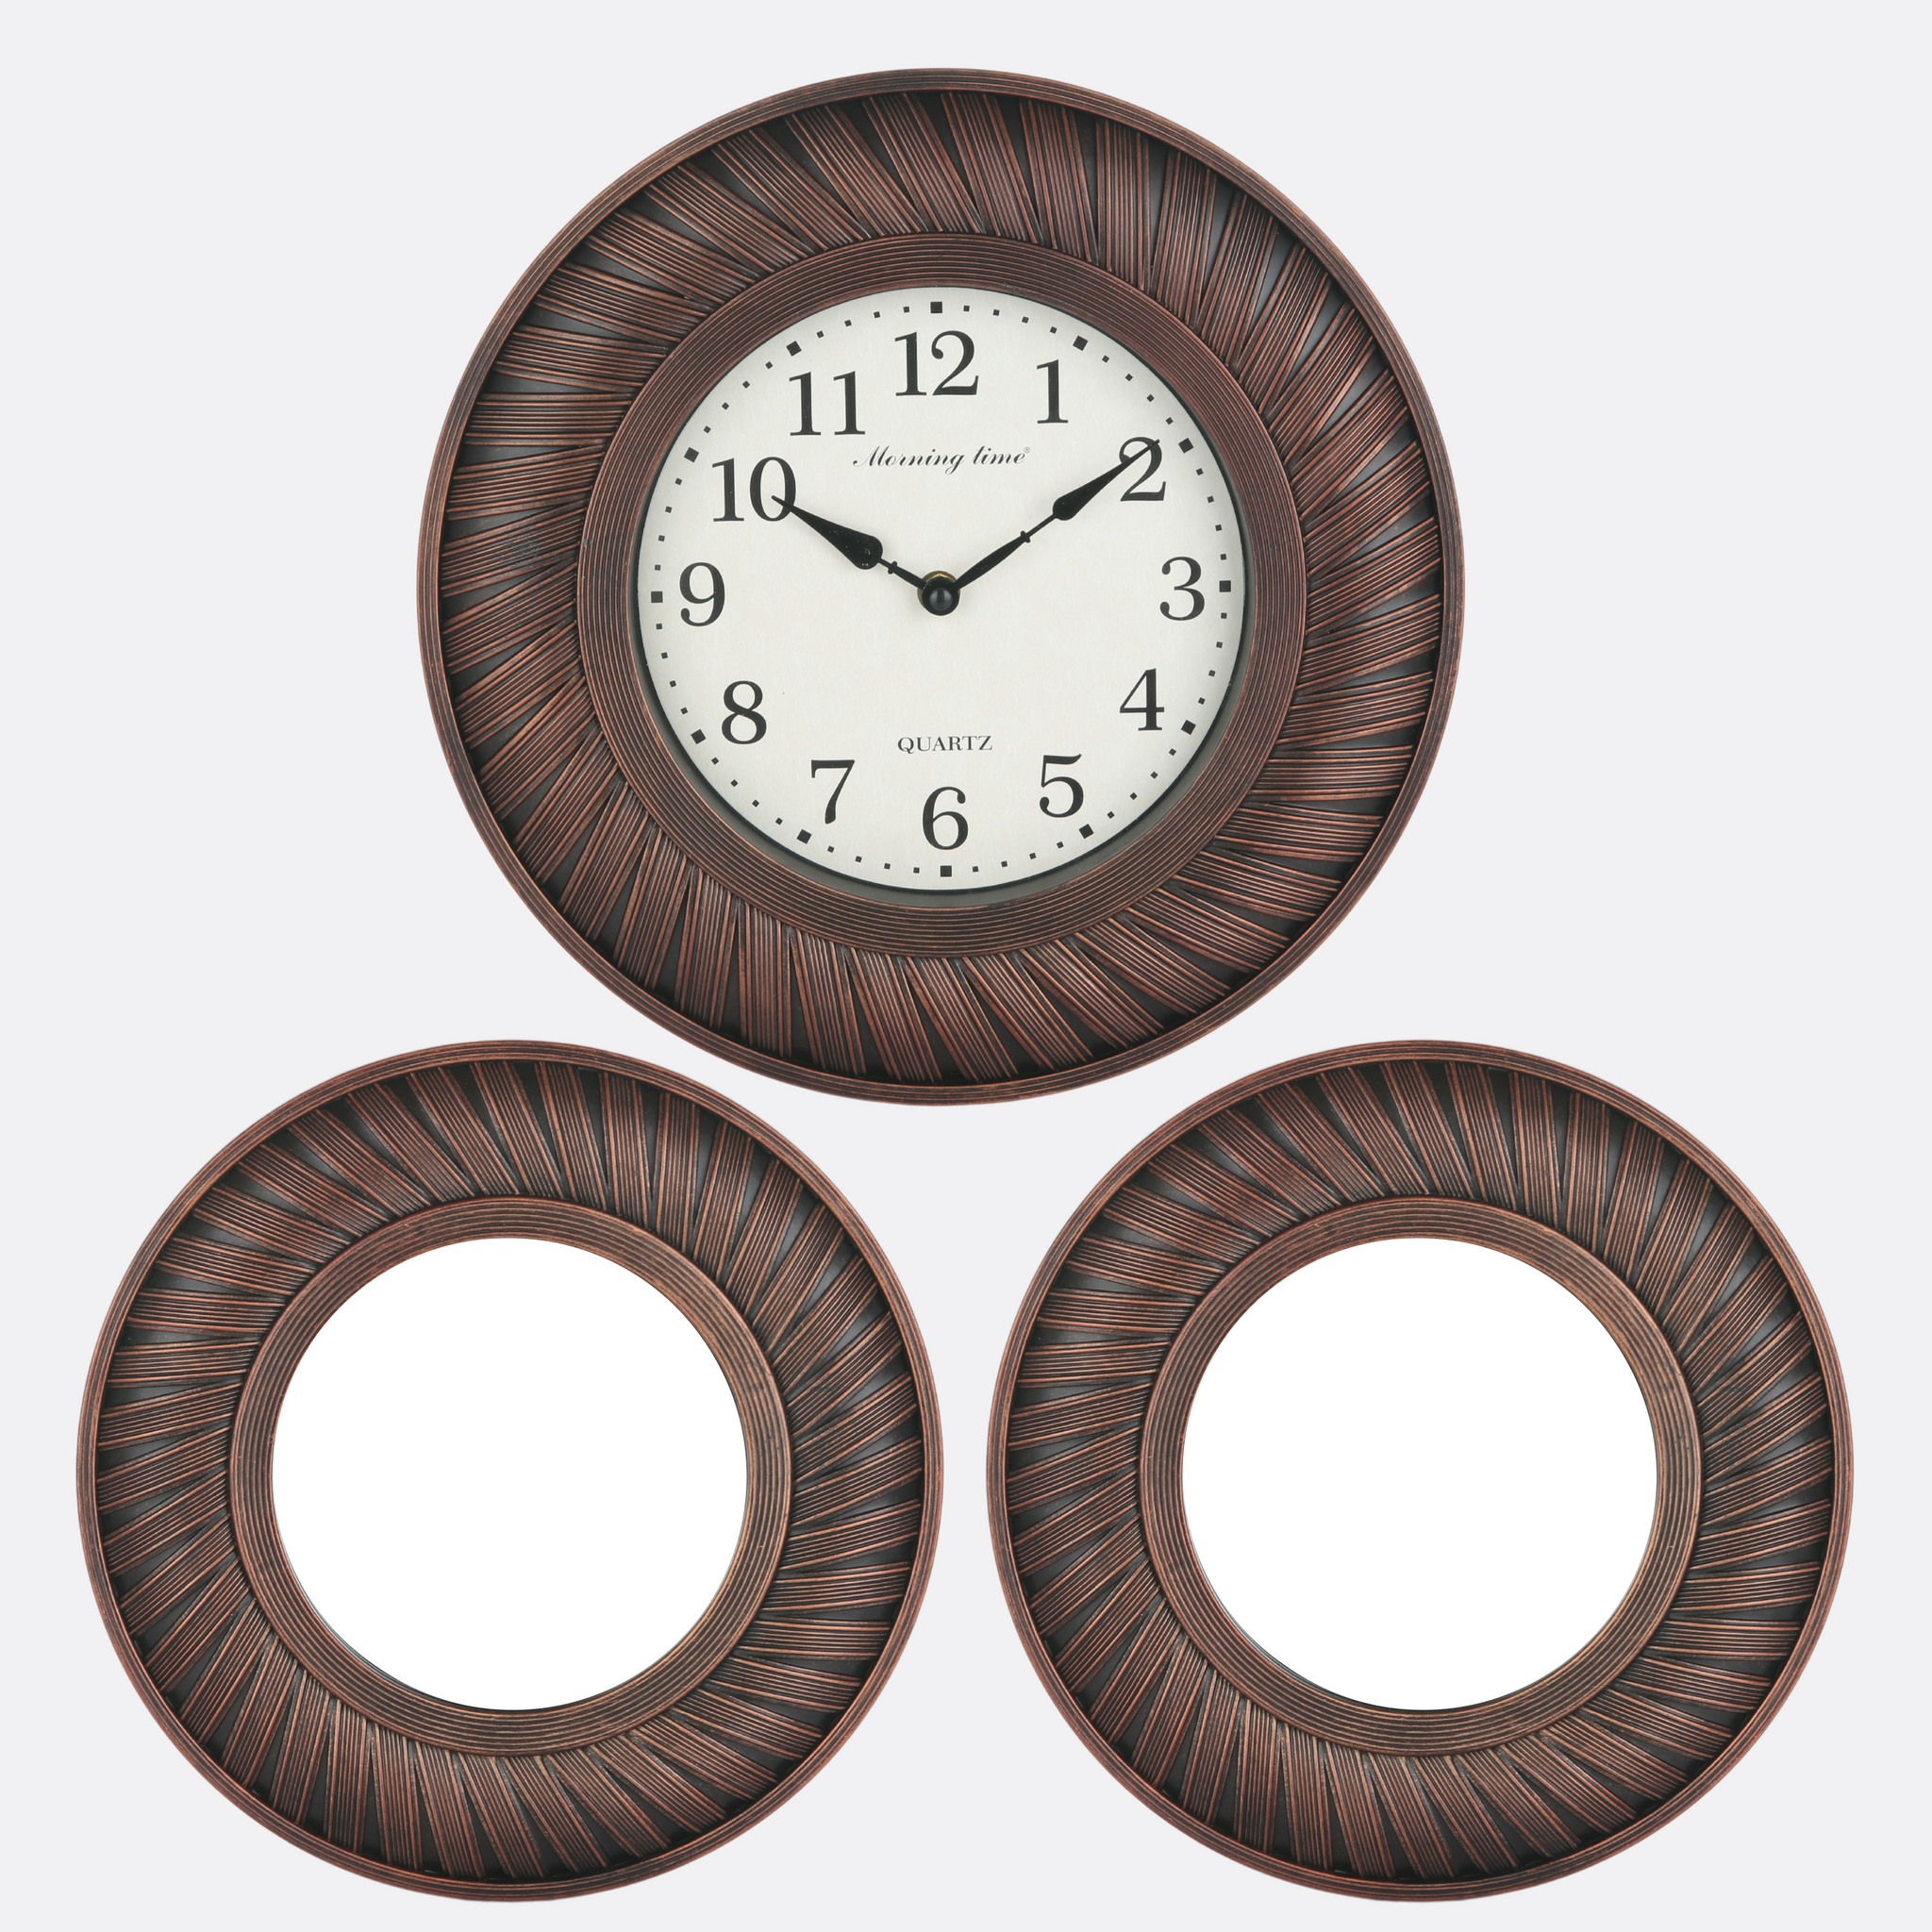 Wooden Texture Mirrors With Clock (Set Of Three)